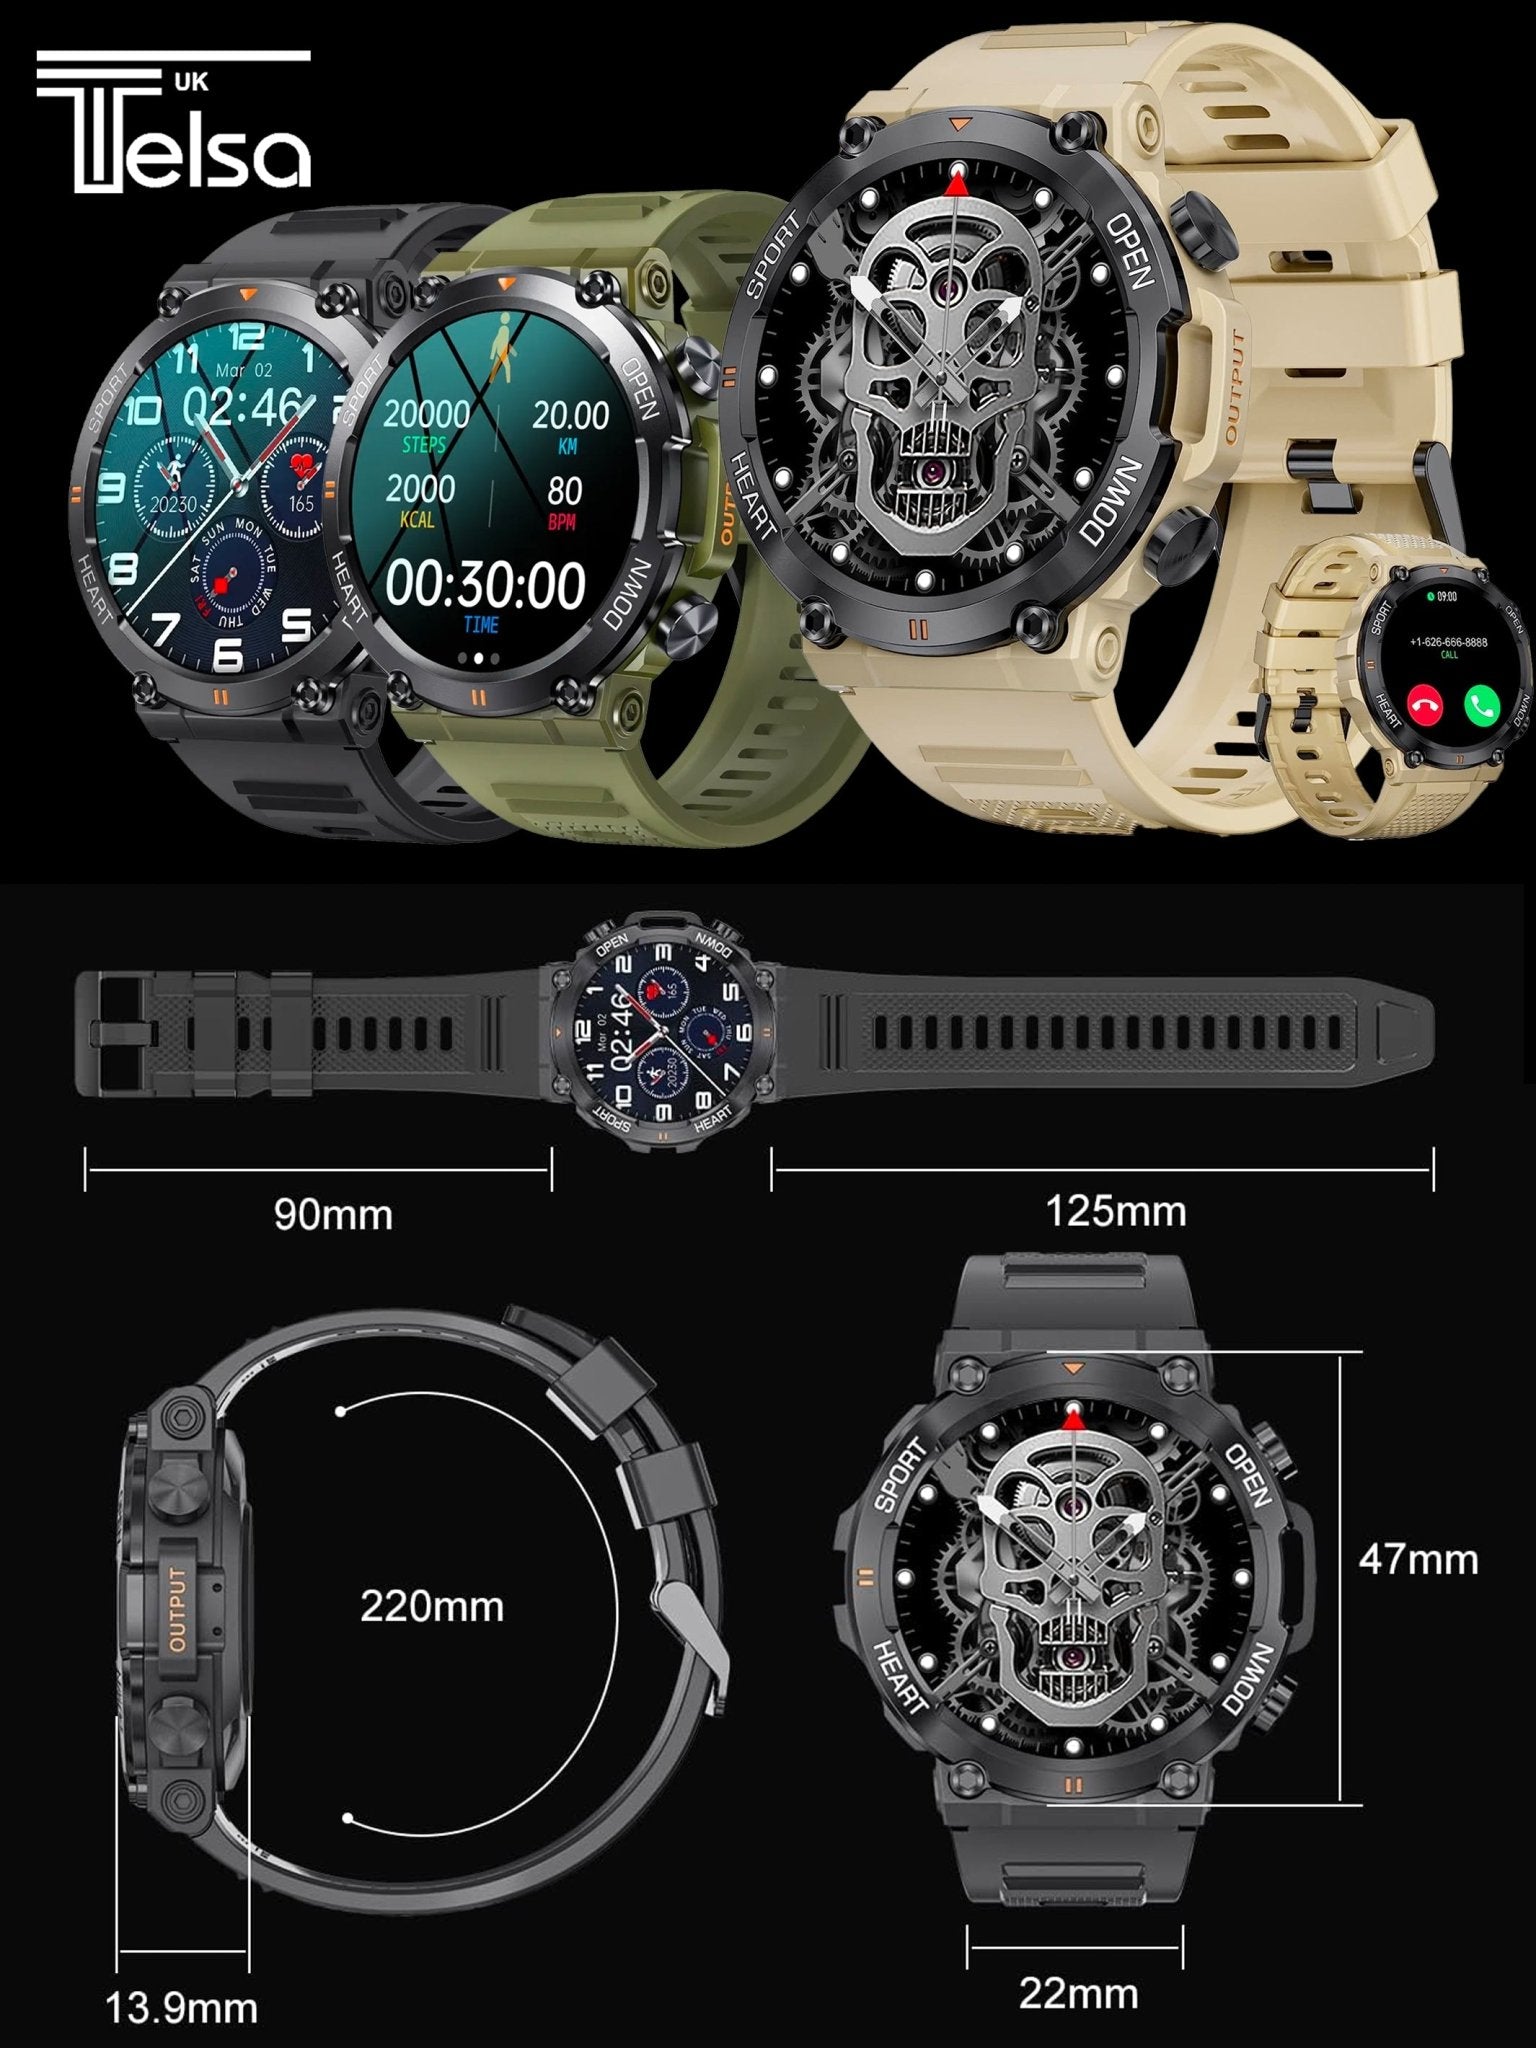 4elementsclothingTelsaTELSA UK - Smart Watch Waterproof IP67 military style mens Sports & fitness digital Watch with Touch Screen display, Fitness Watch, Heart Rate, Step counter Smart Watch for men IOS & AndroidWatch5060976970313